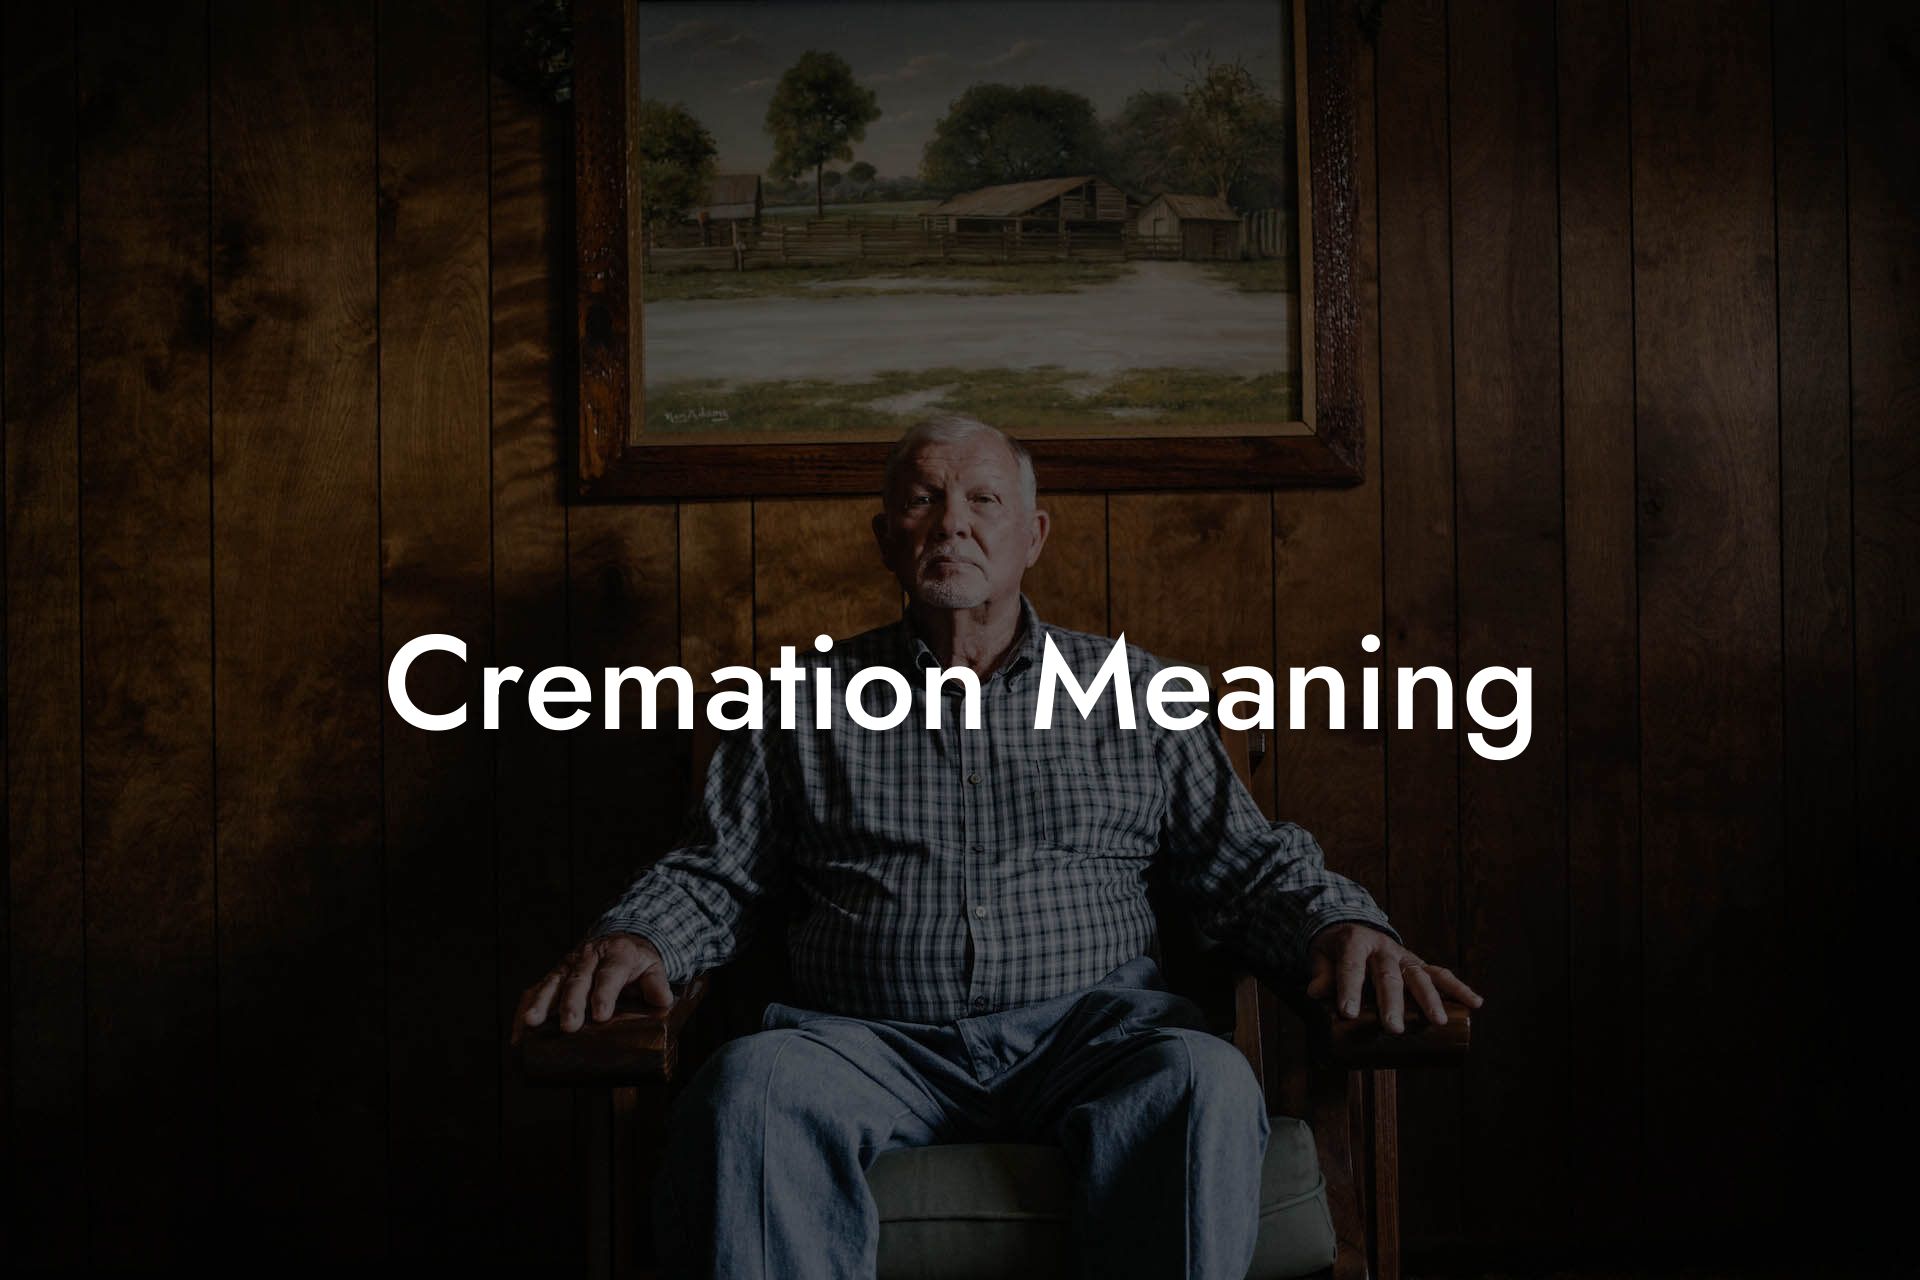 Cremation Meaning